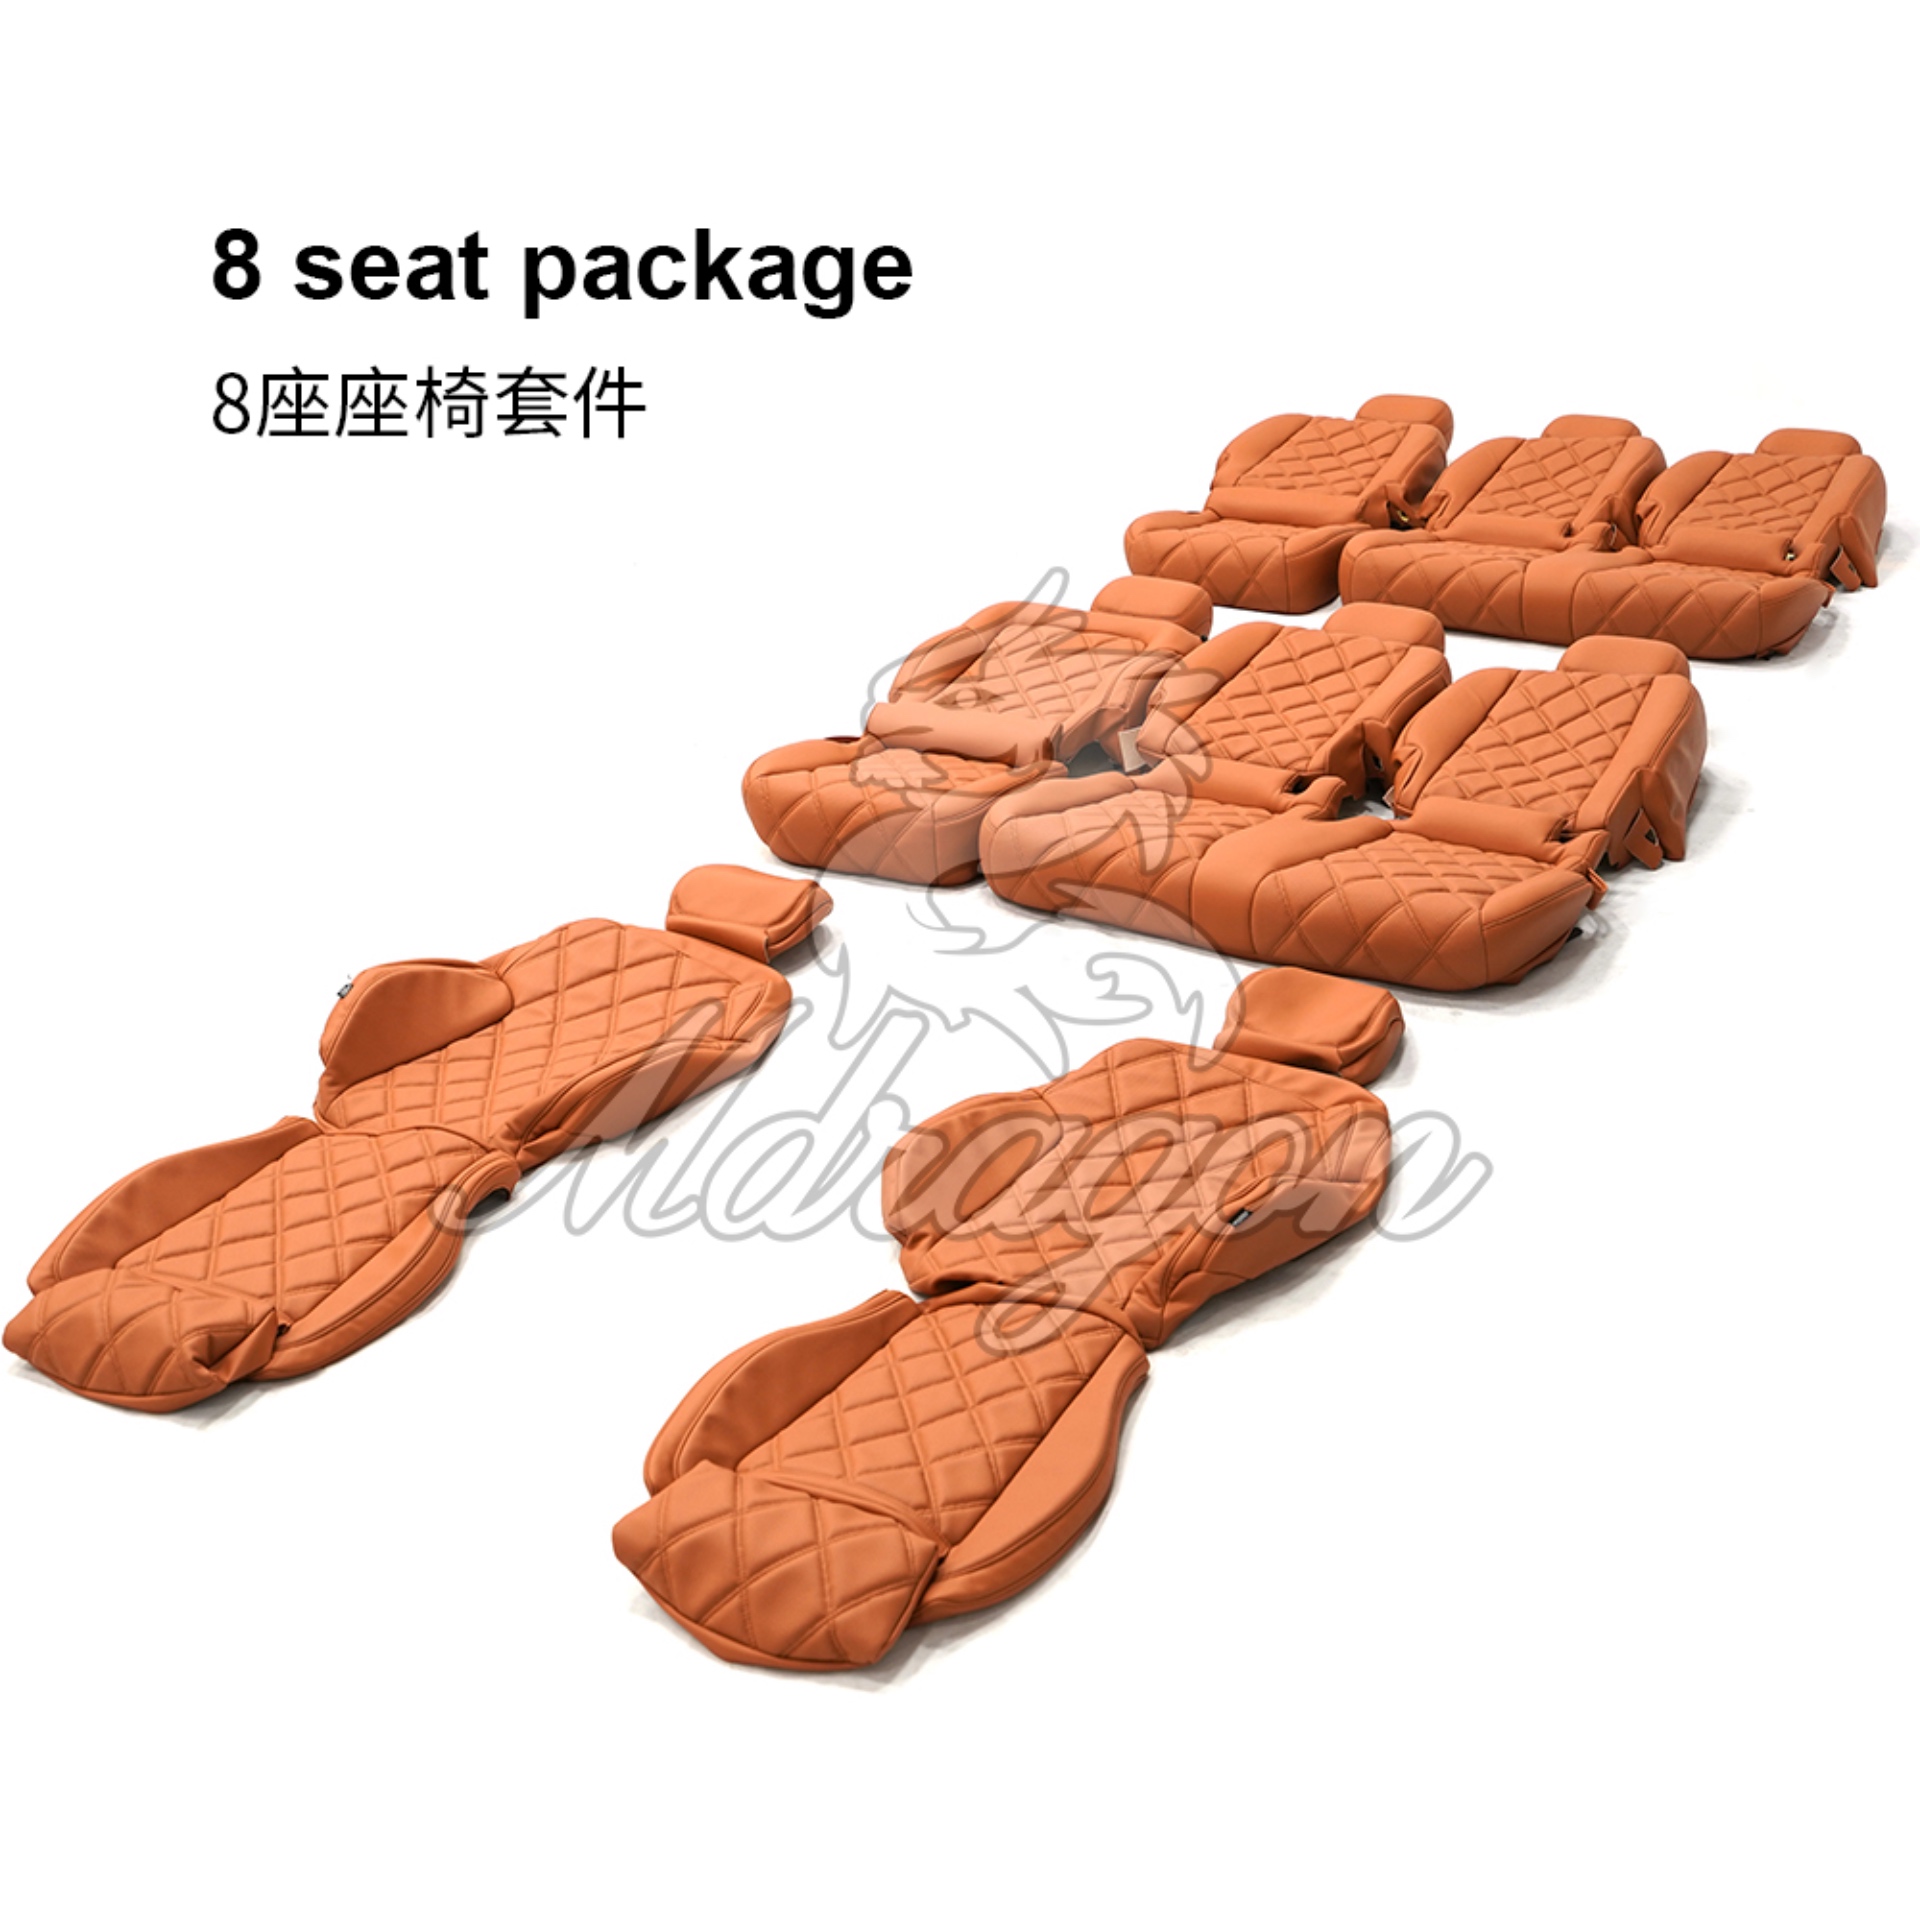 Germany order for 8 seats